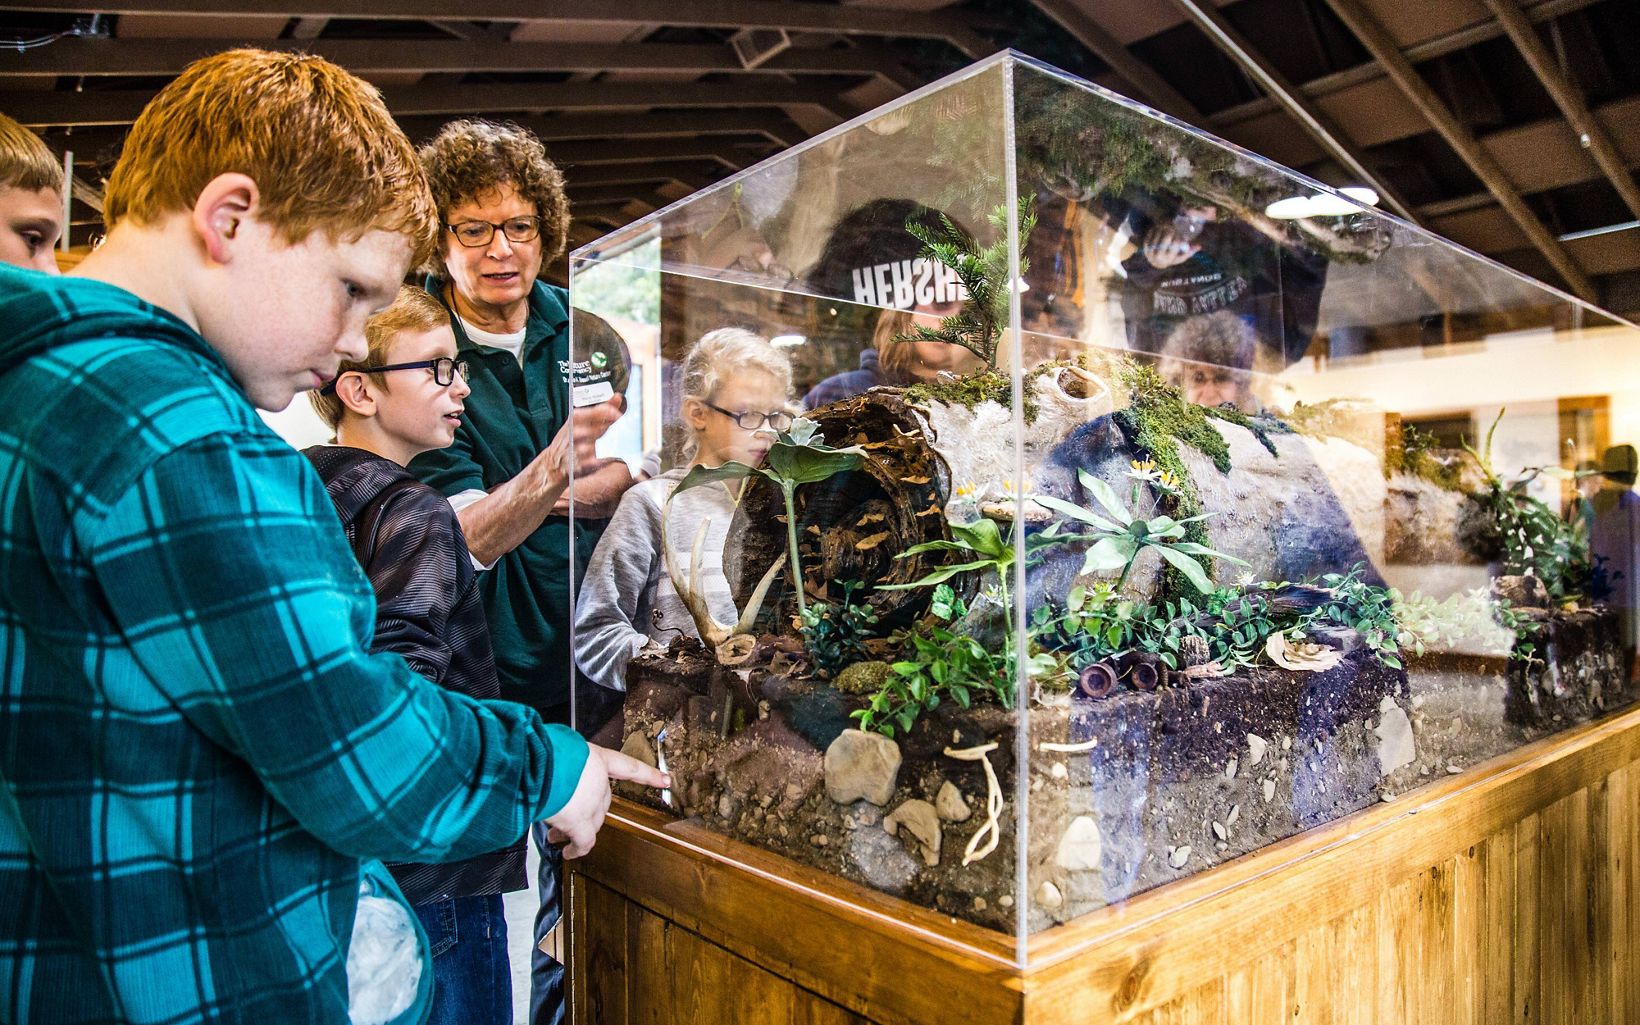 Boy with red hair and blue plaid shirt looks into a glass terrarium that shows a rotting log and a look at the soil underneath it, along with organisms that like that habitat.